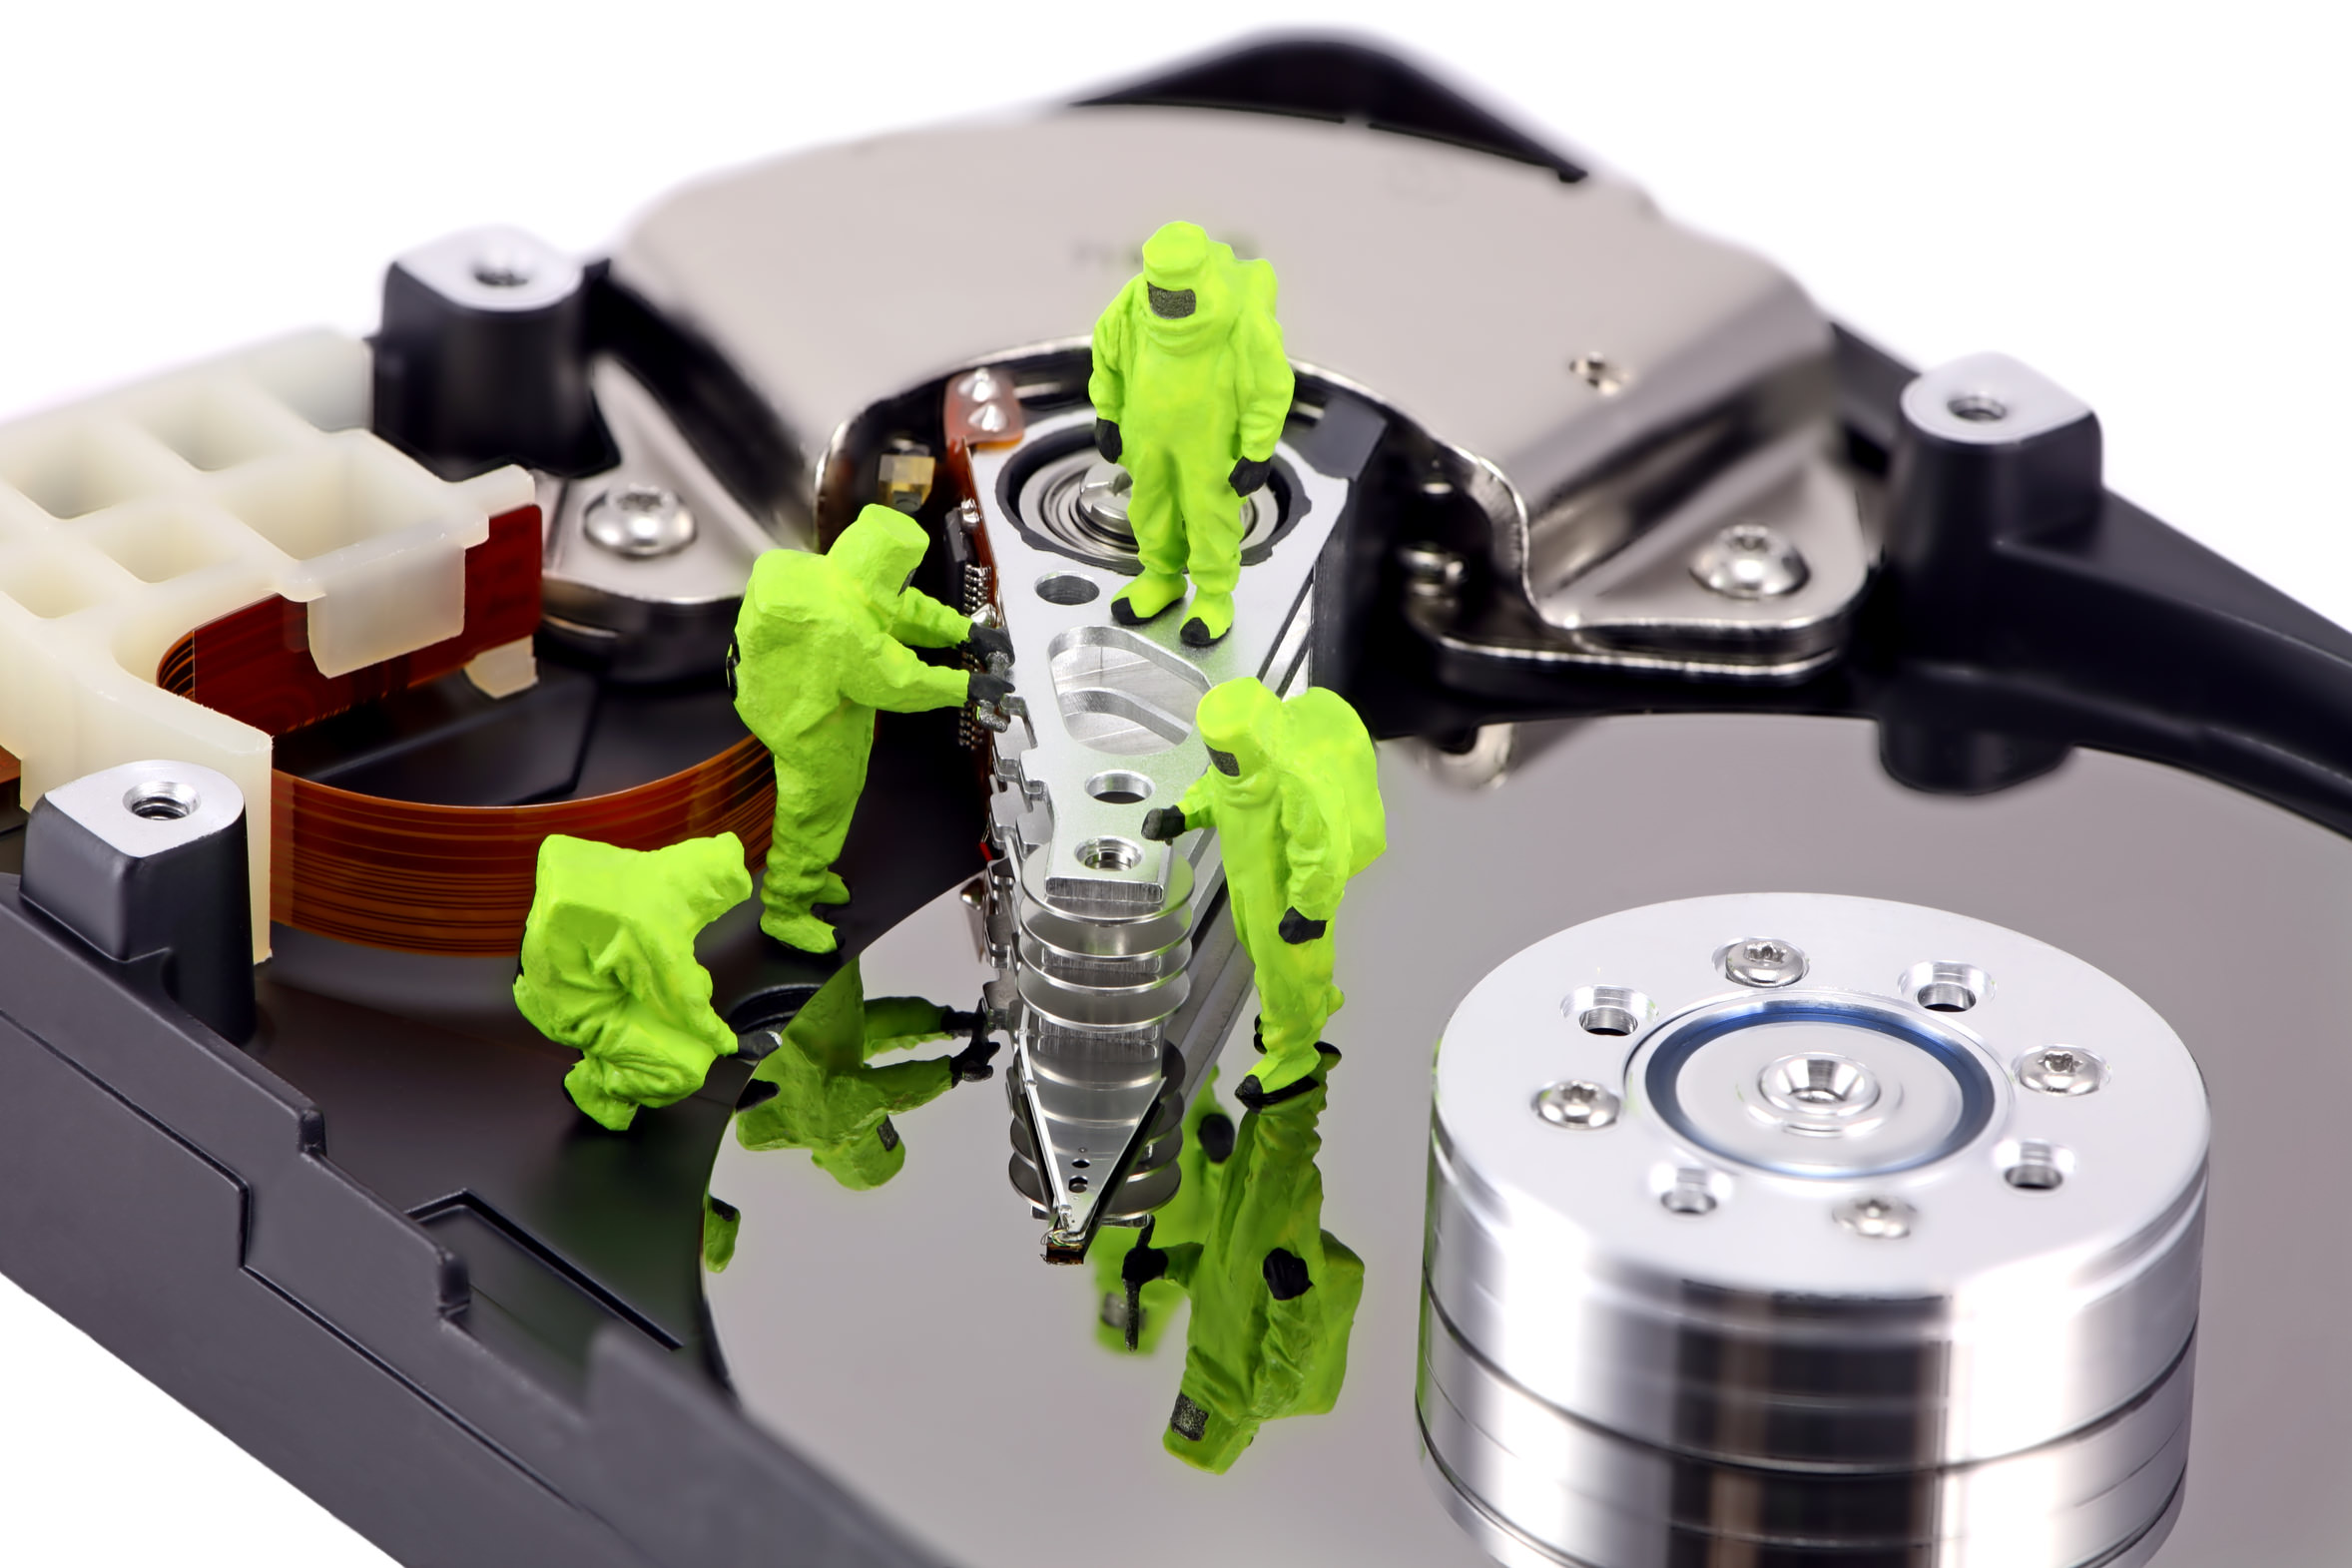 Data Recovery Services From All Phone￼￼